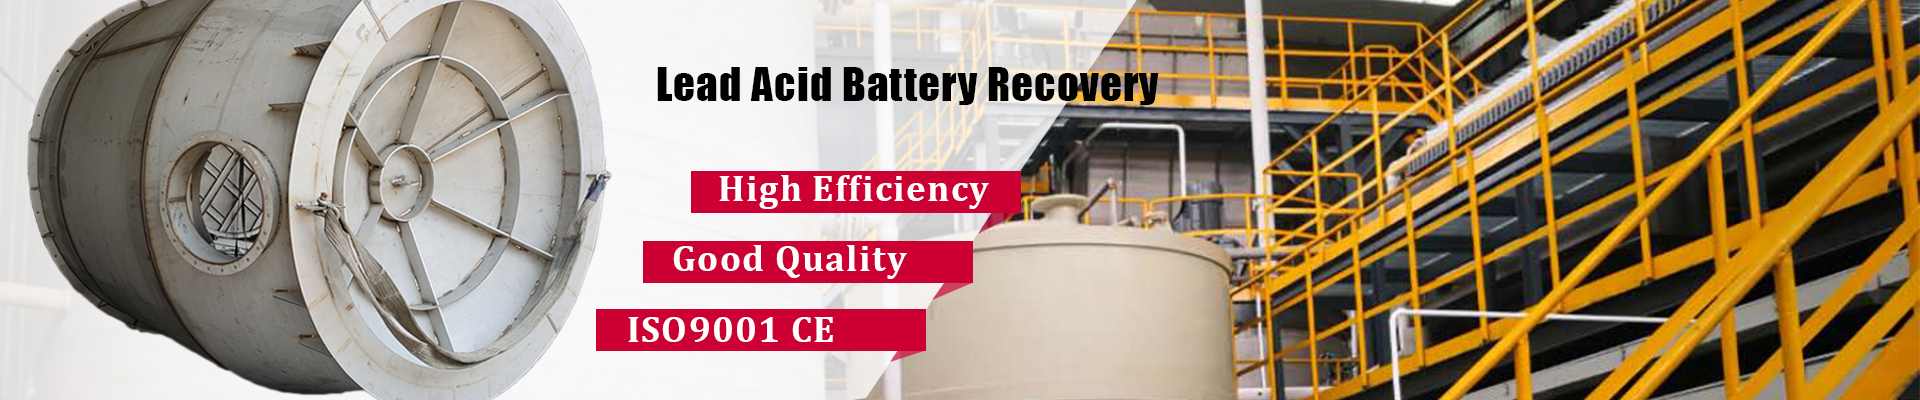 Lead acid battery recovery auxiliary system